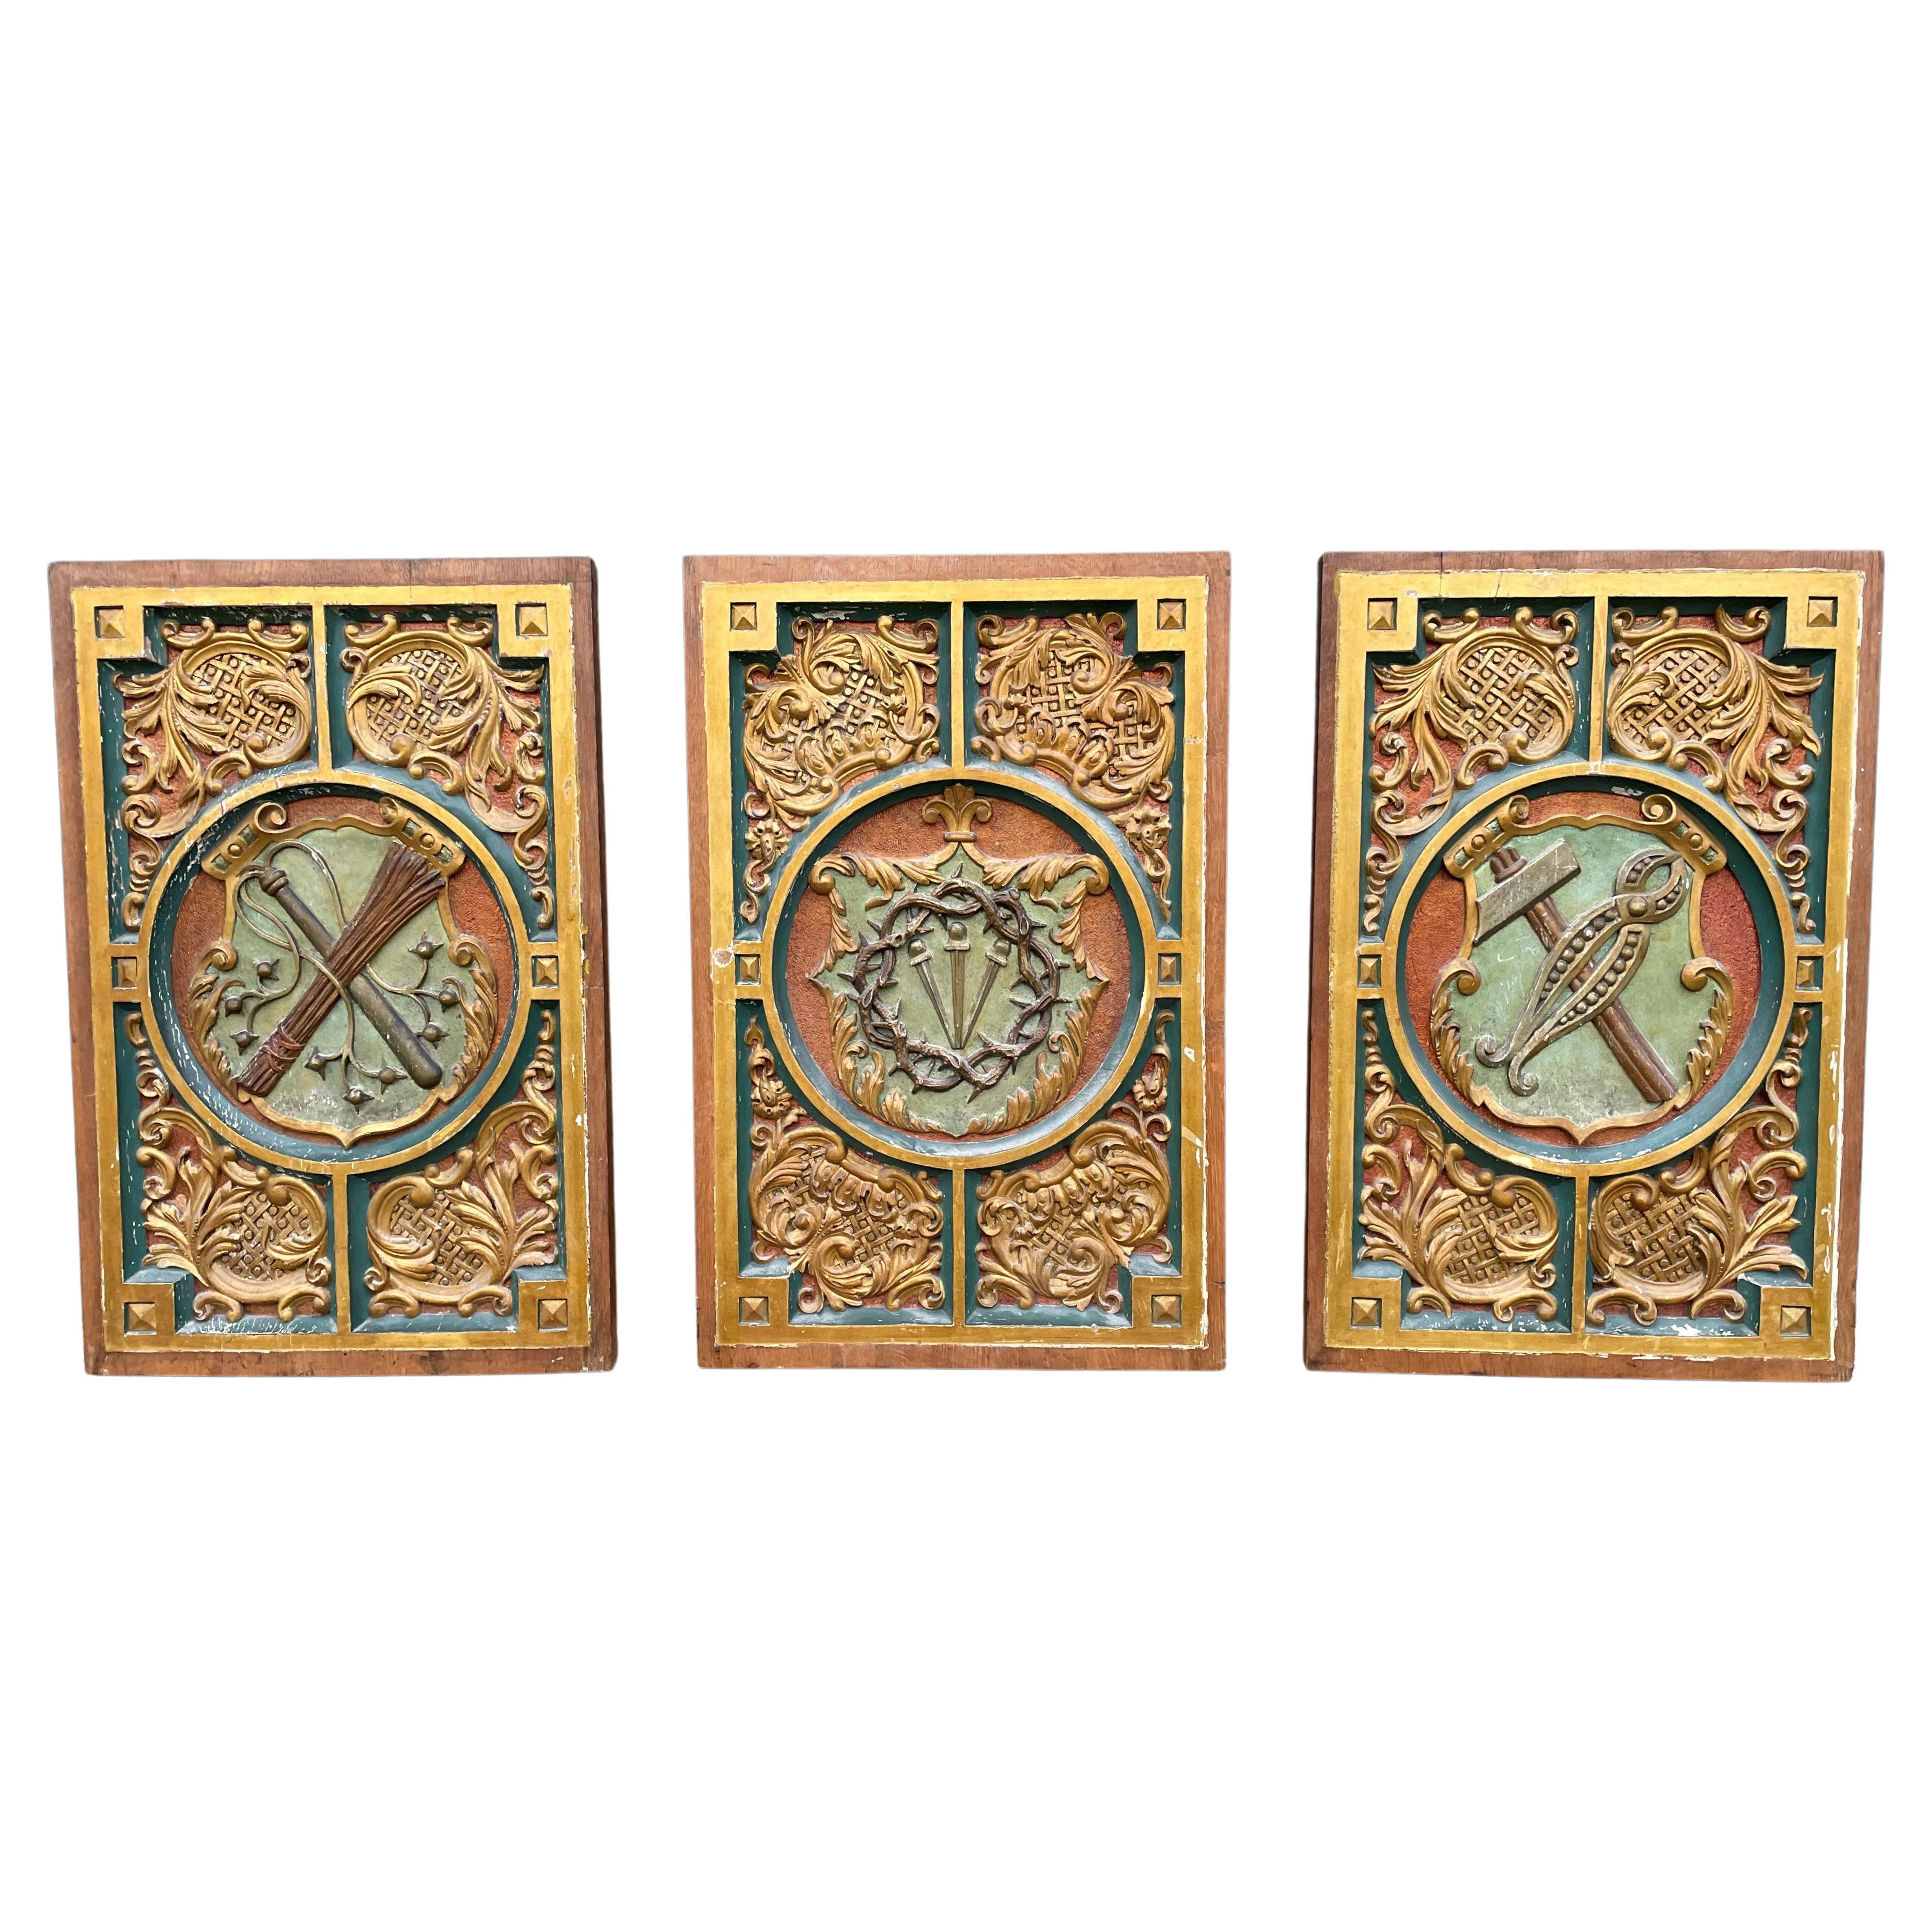 Antique Hand Carved, Gilt and Painted Solid Oak Panels with Arma Christi Symbols